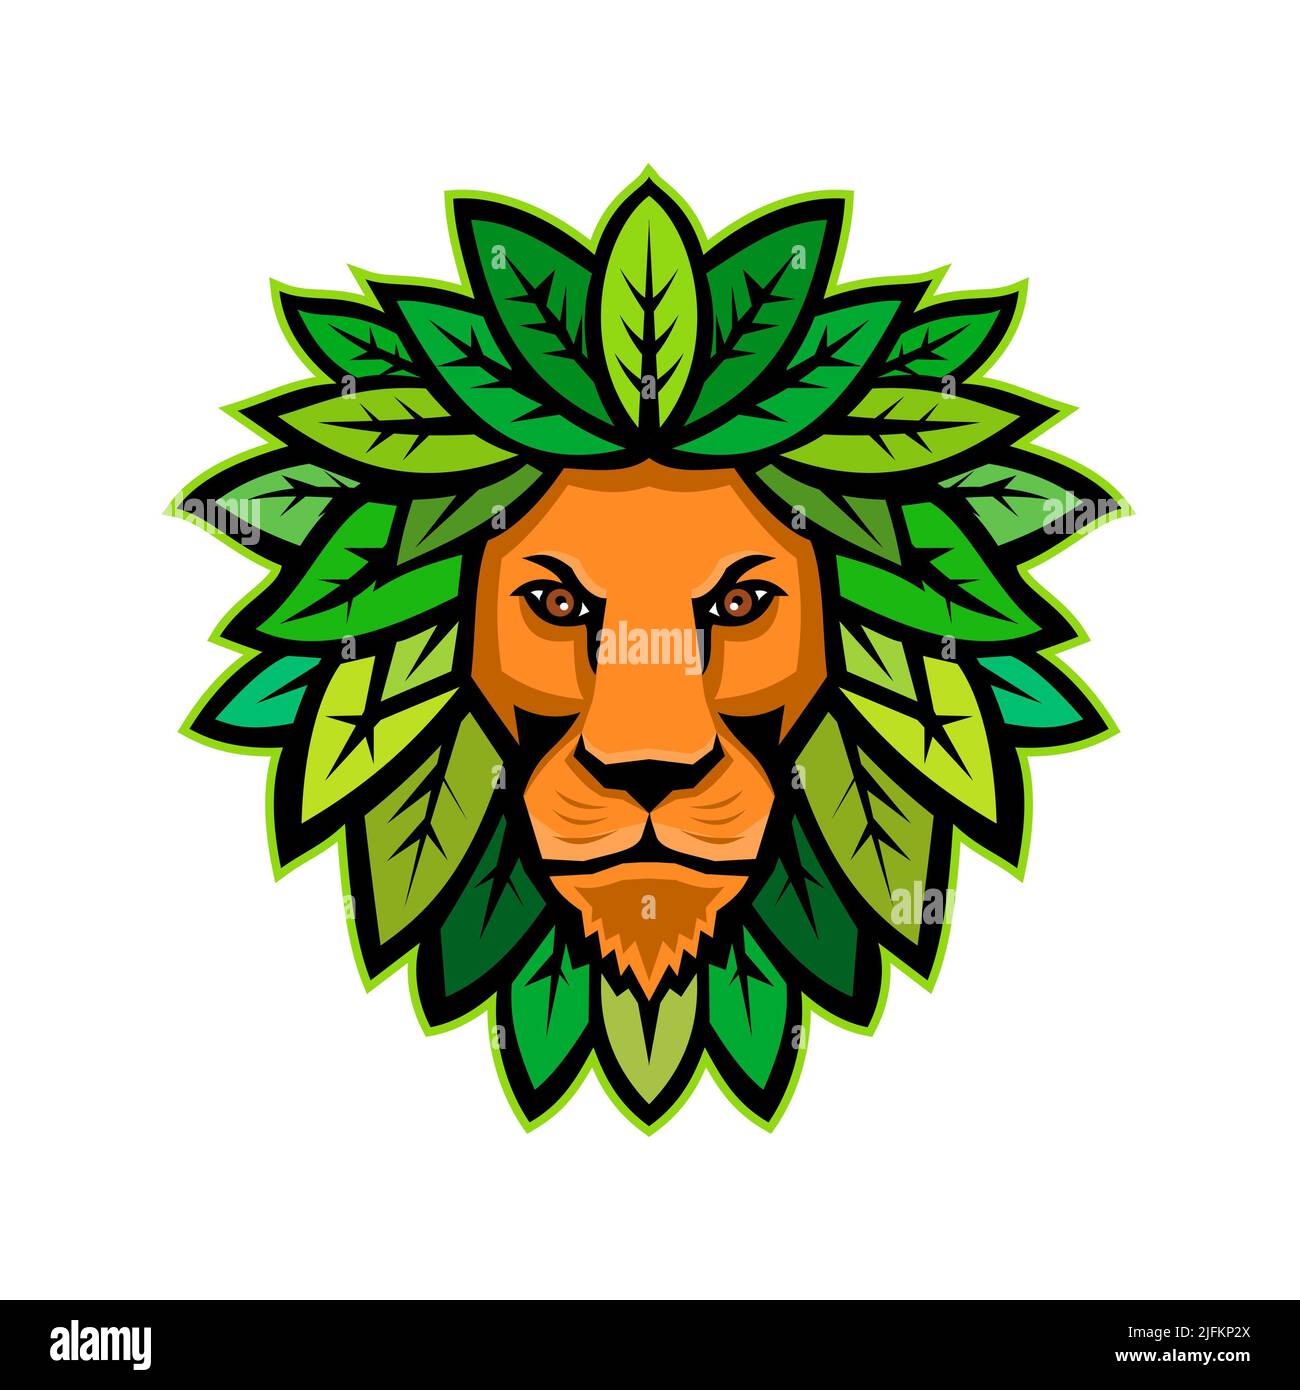 Mascot icon illustration of head of a lion with leaves as mane viewed from front on isolated background in retro style. Stock Photo